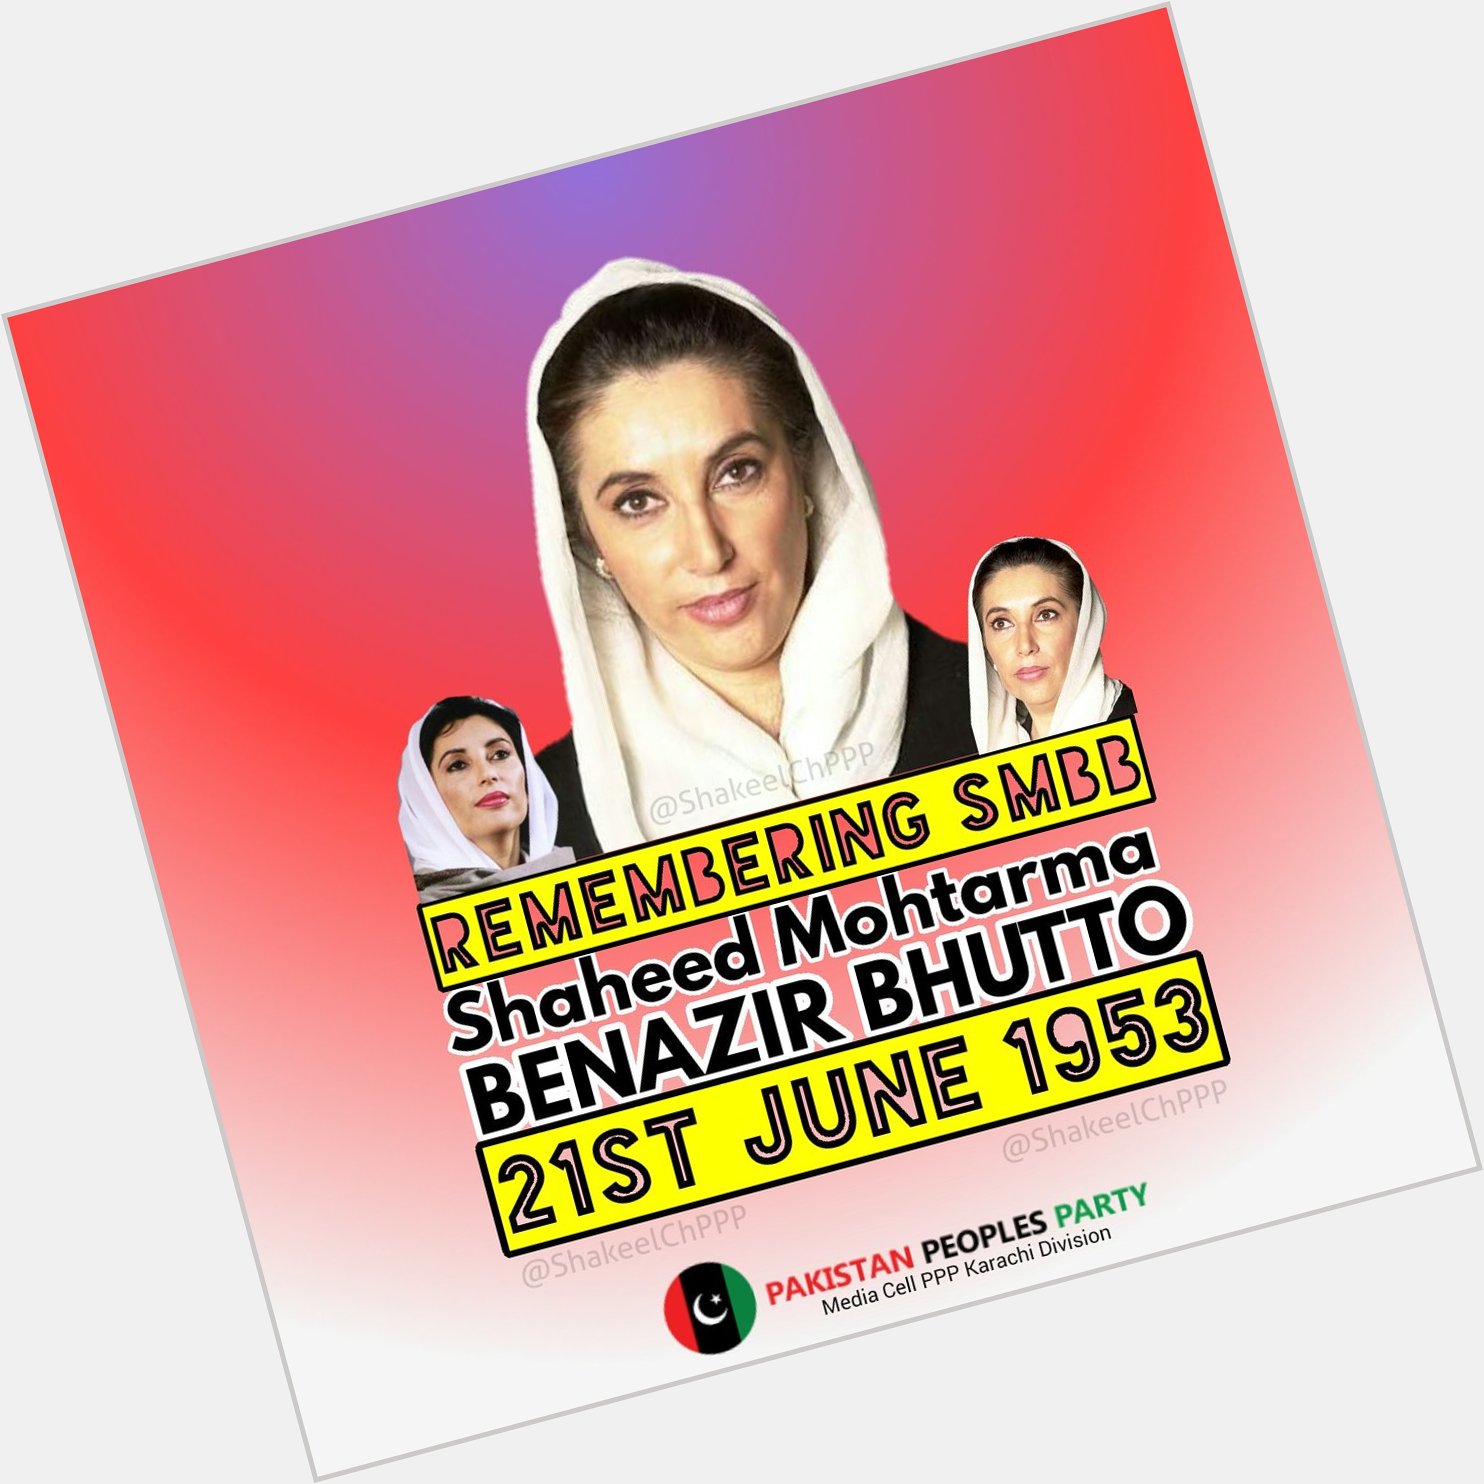 Happy Birthday Daughter of the east ..
Shaheed Mohtarma Benazir Bhutto  